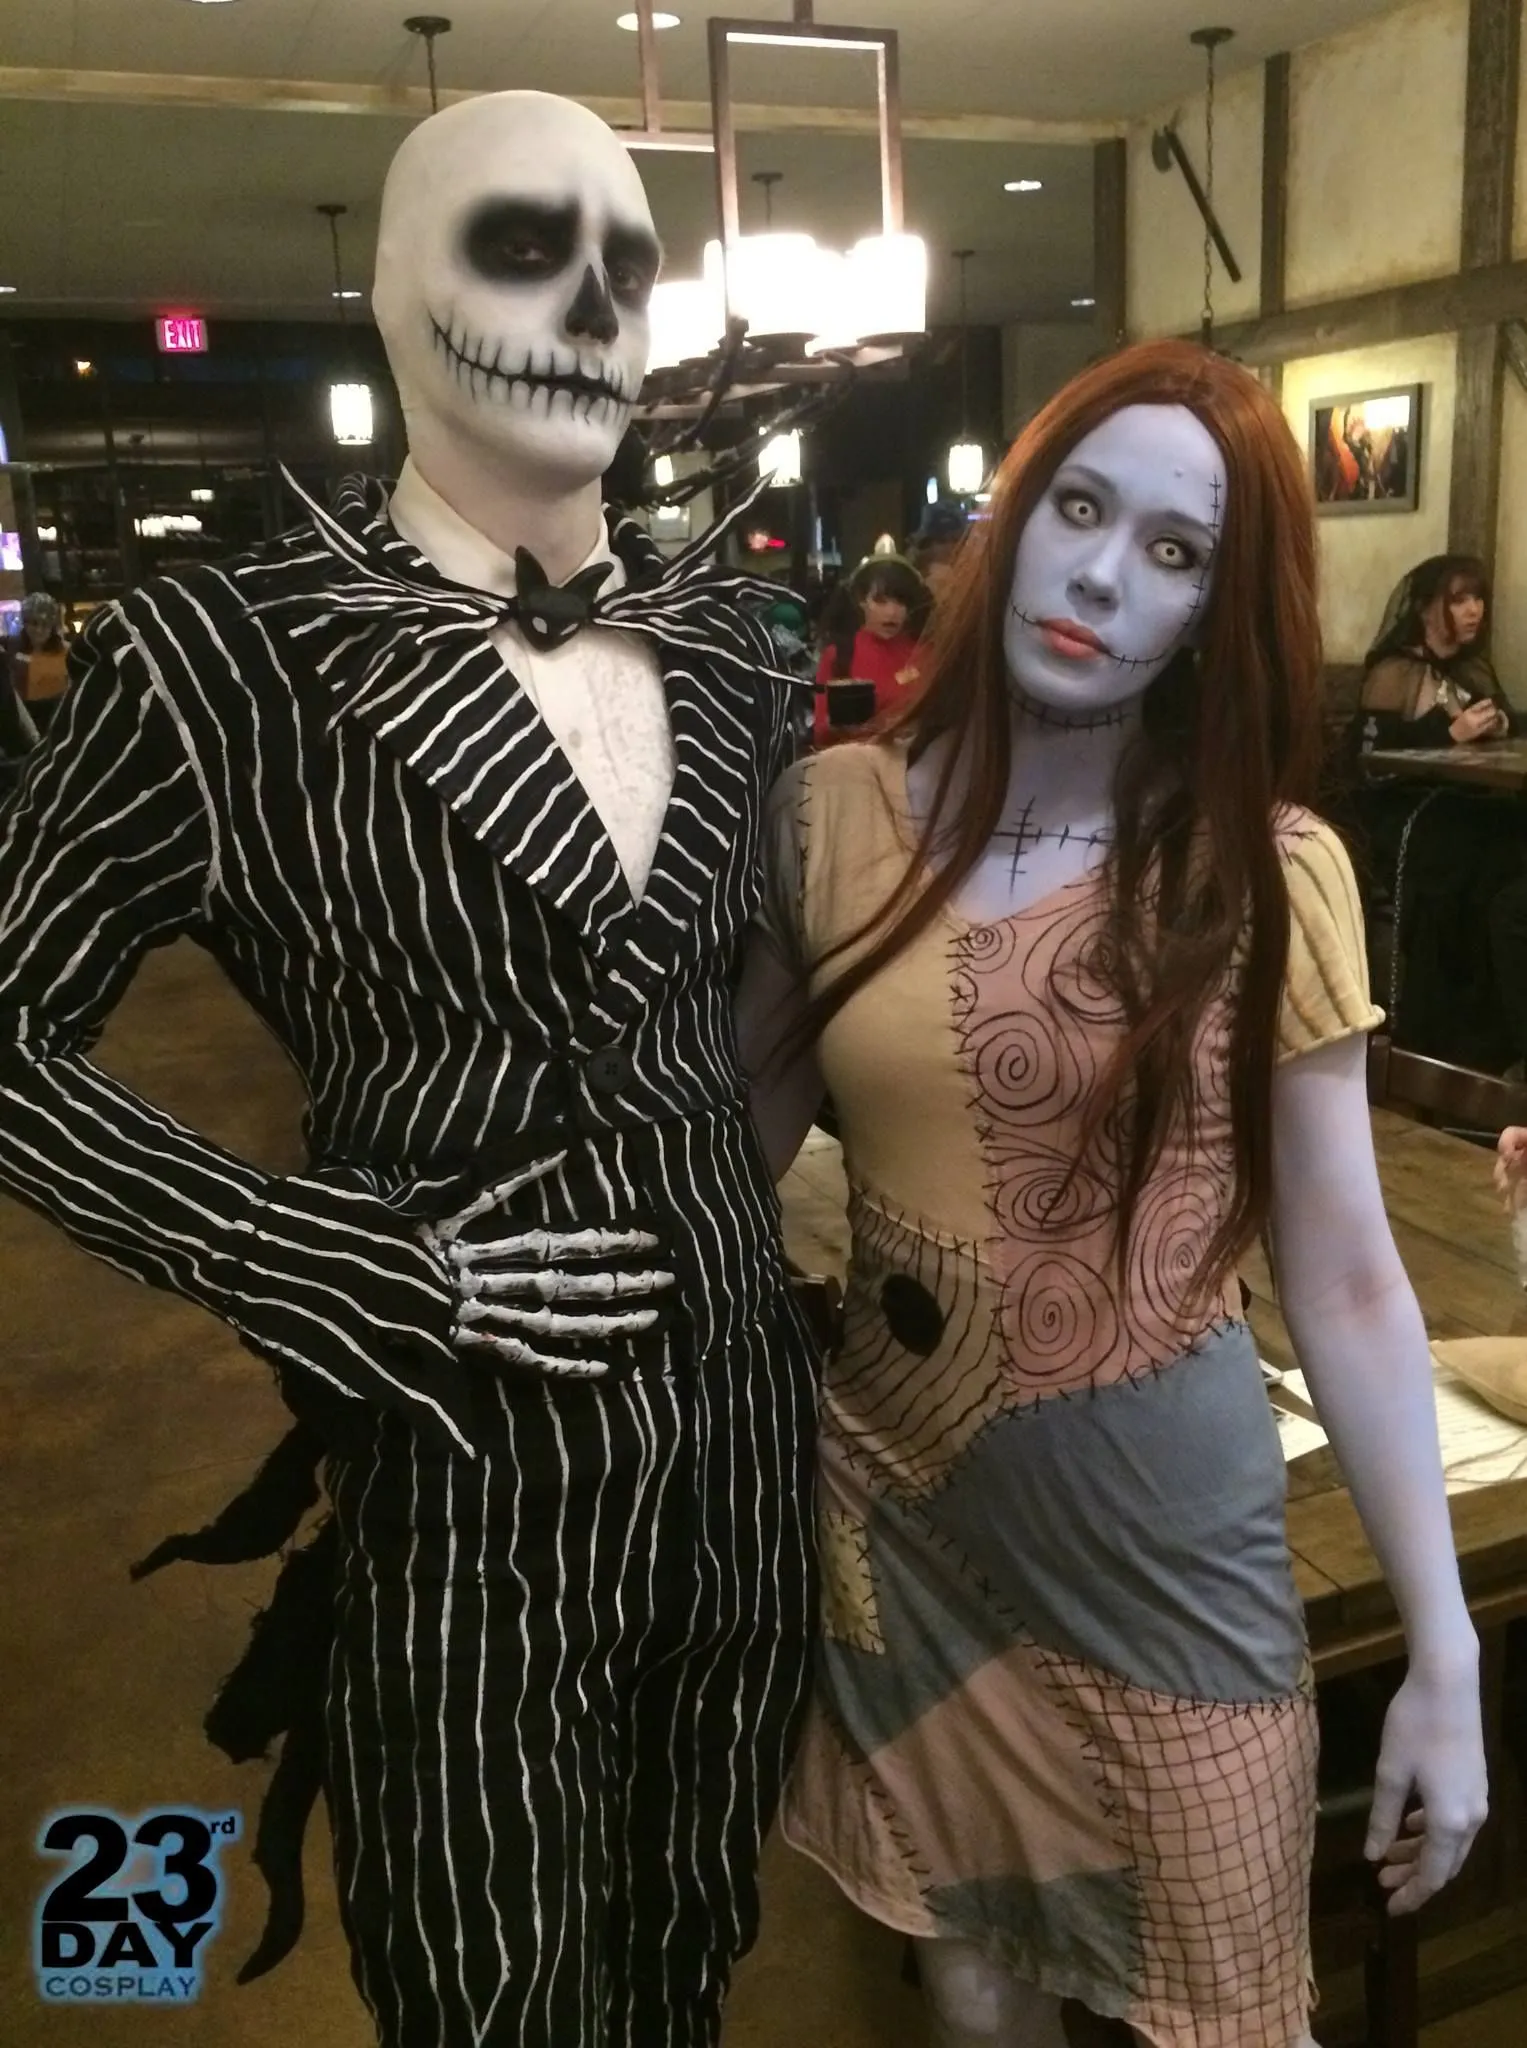 Jack and sally cosplay | Most creative halloween costumes, Nightmare before  christmas costume, Clever halloween costumes